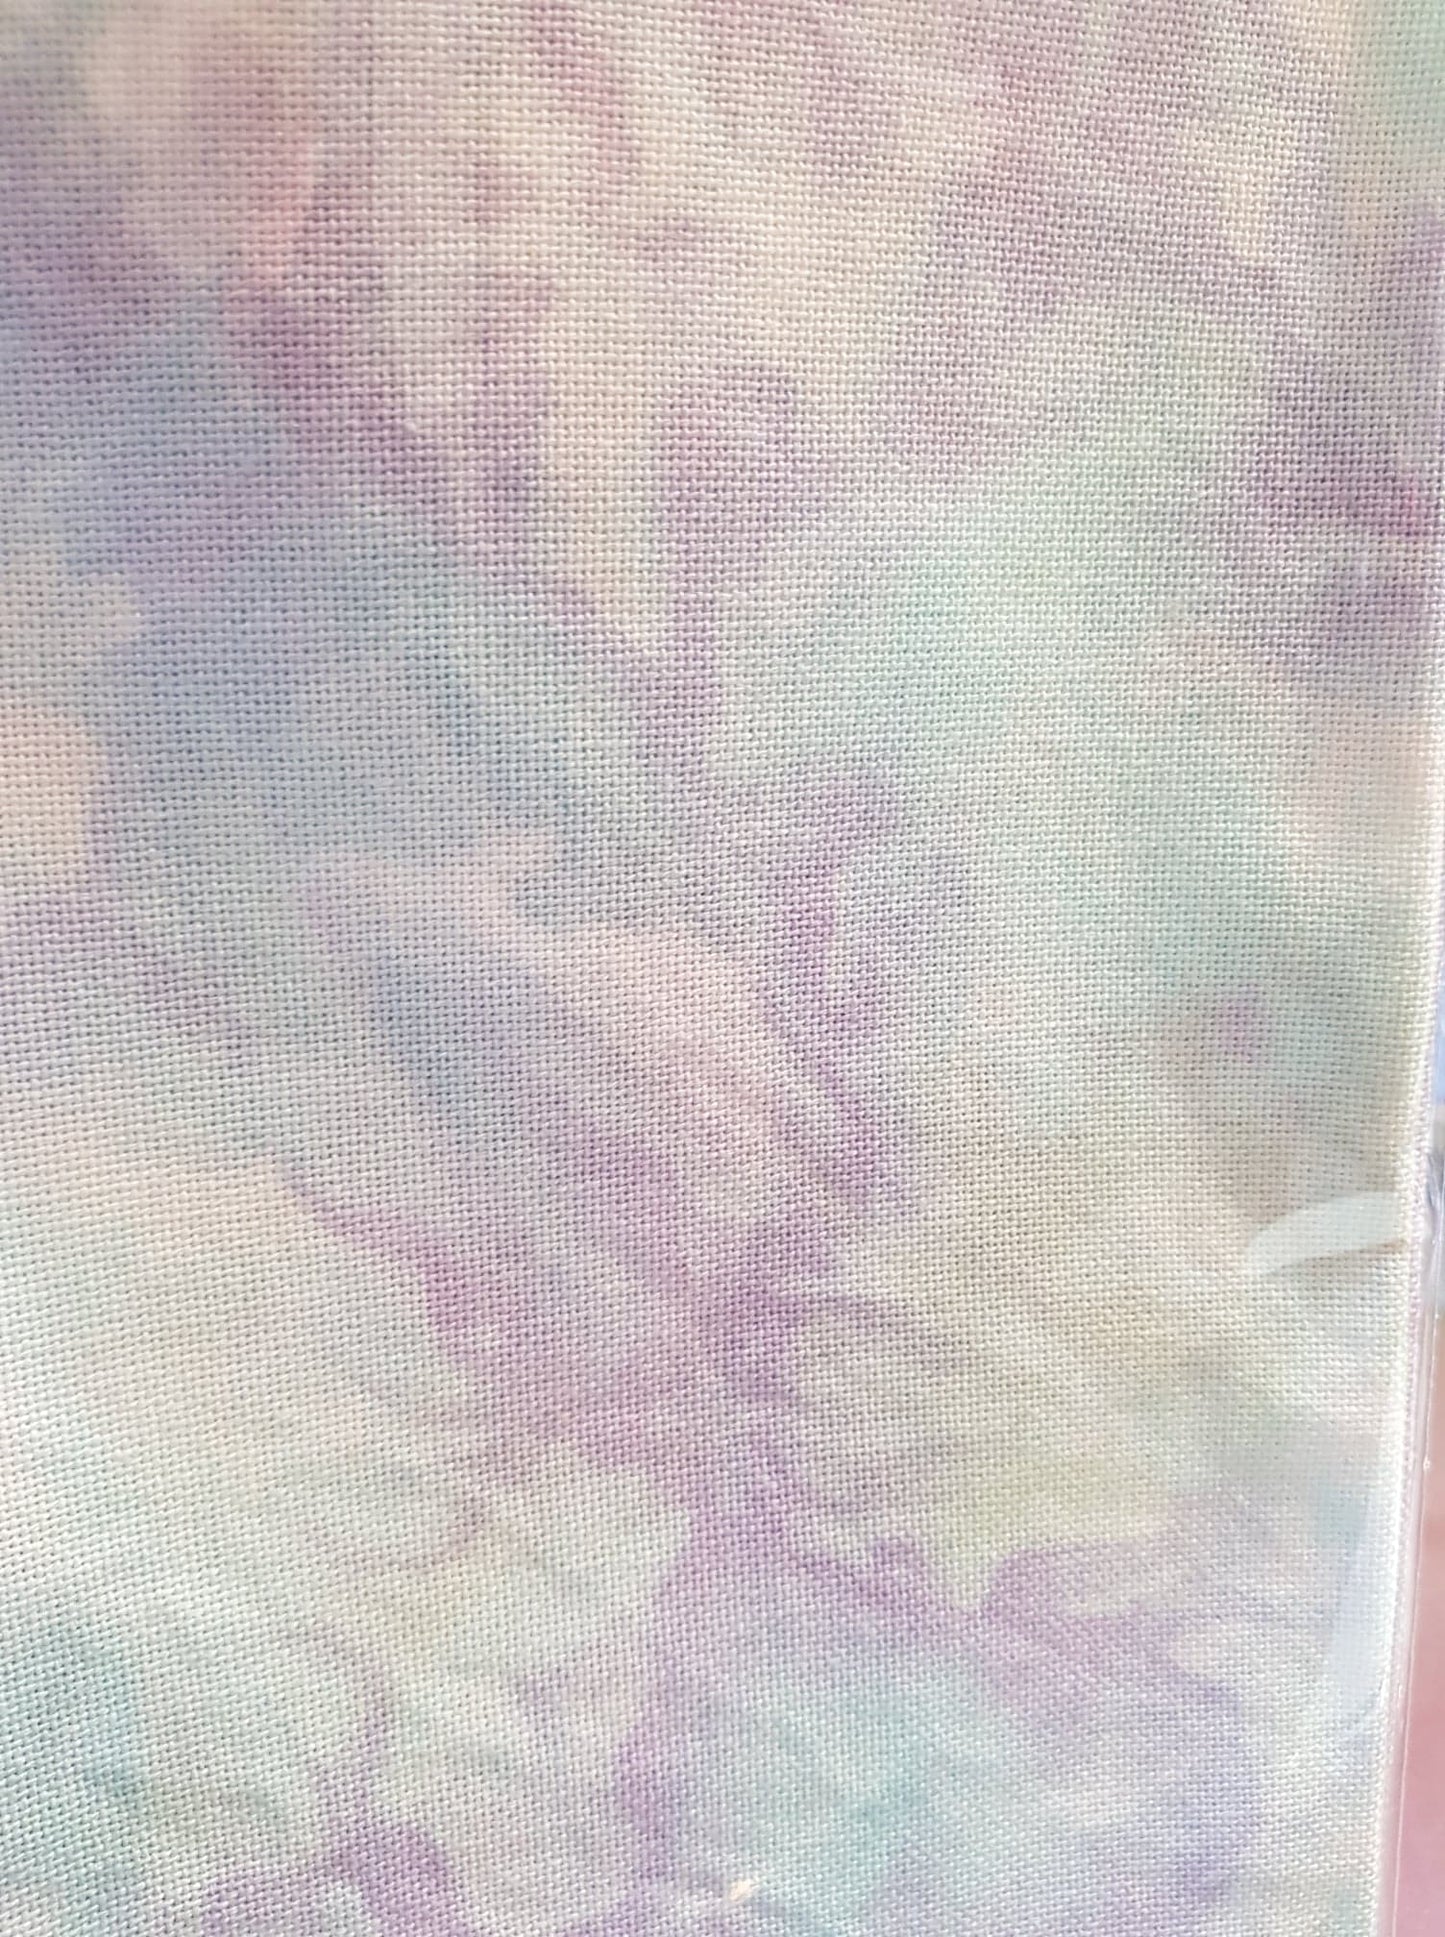 Fancy Fabric Hand Dyed - Starlet